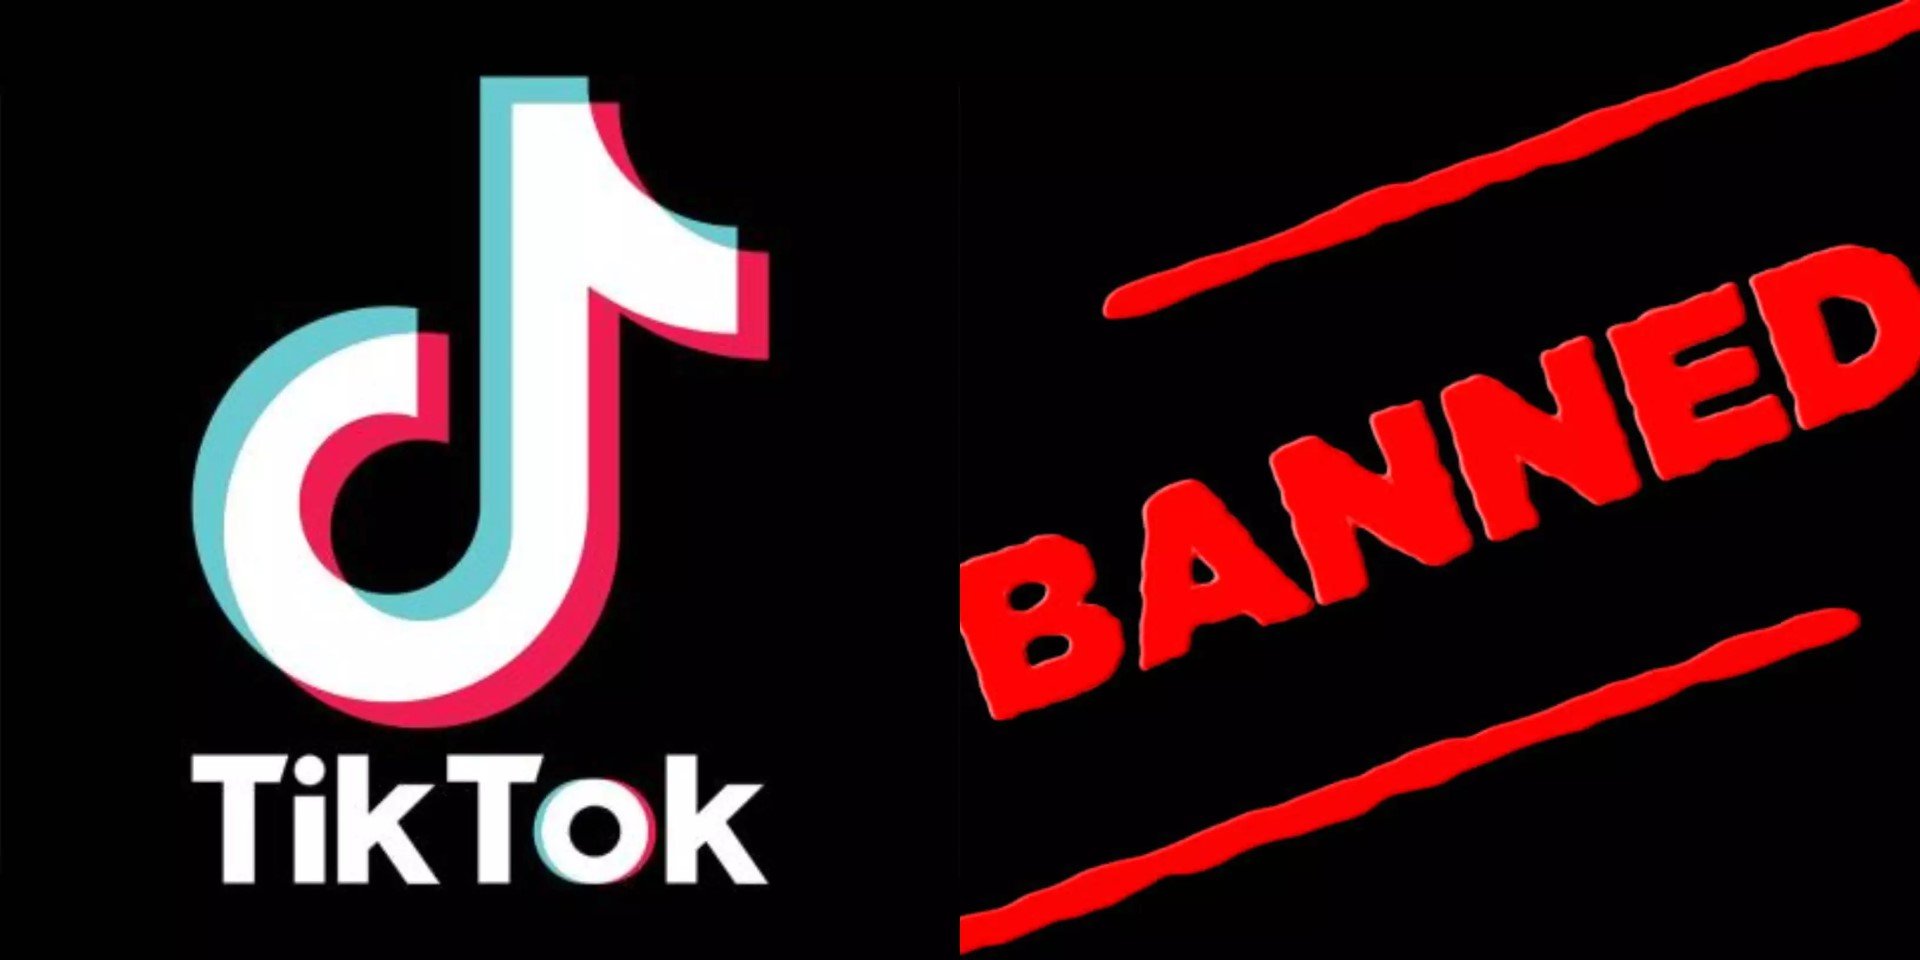 Famous App TikTok Is Now Banned in India | FOK!